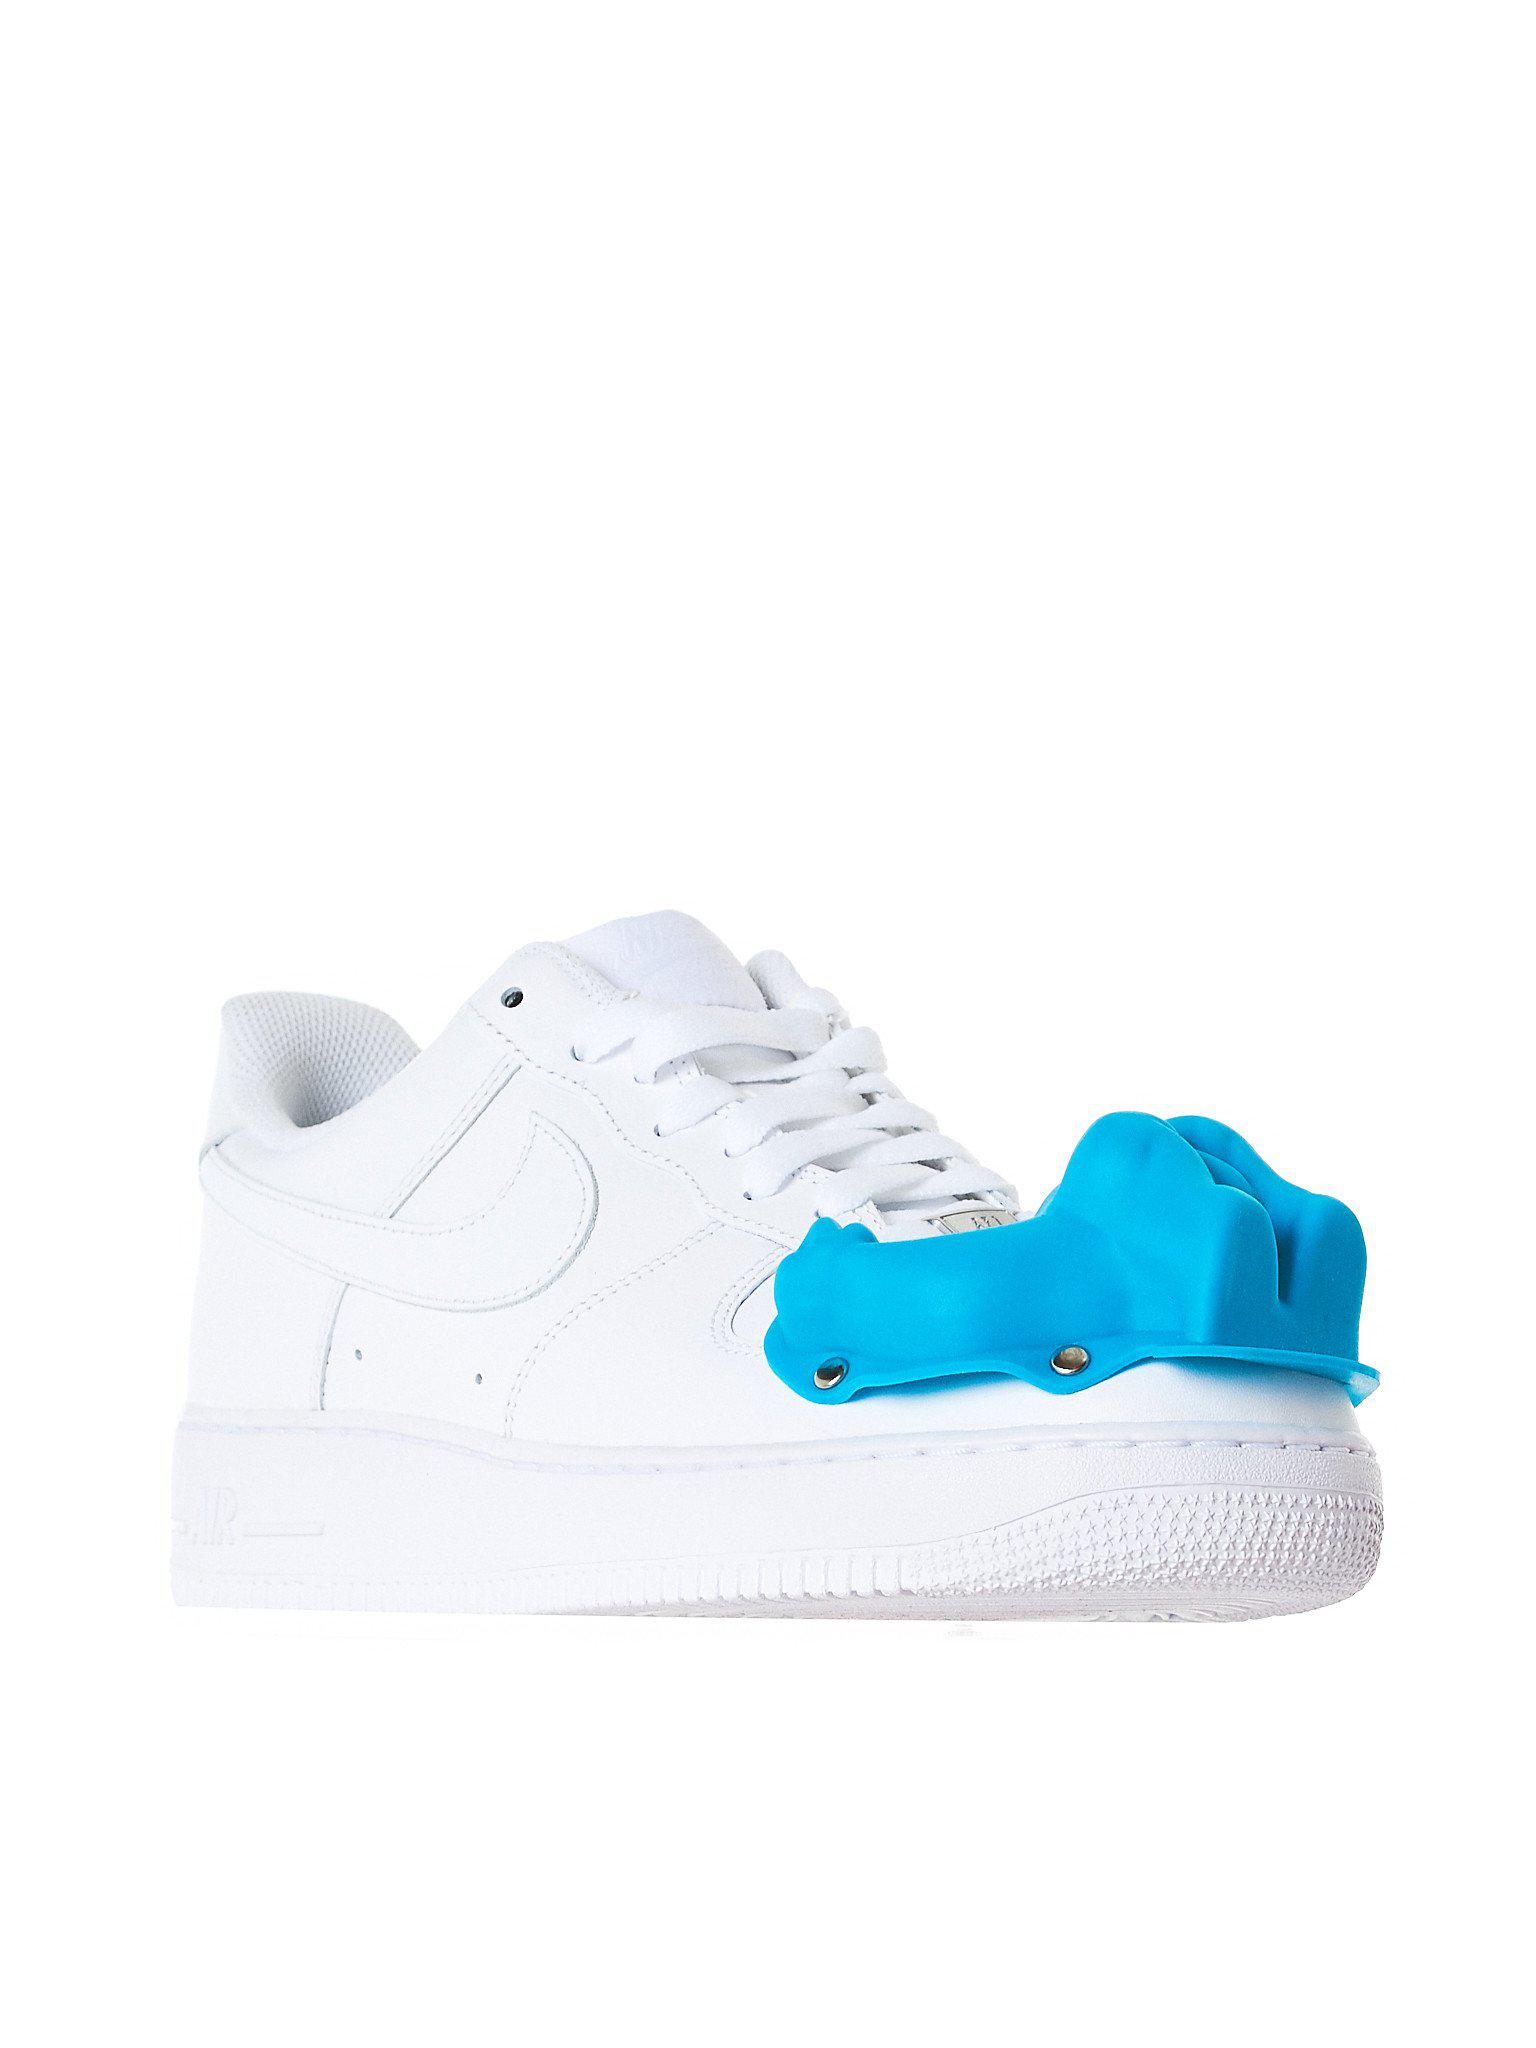 Comme des Garçons Nike Moulded Dinosaur Air Force 1 Sneakers in 2 (Blue) -  Lyst